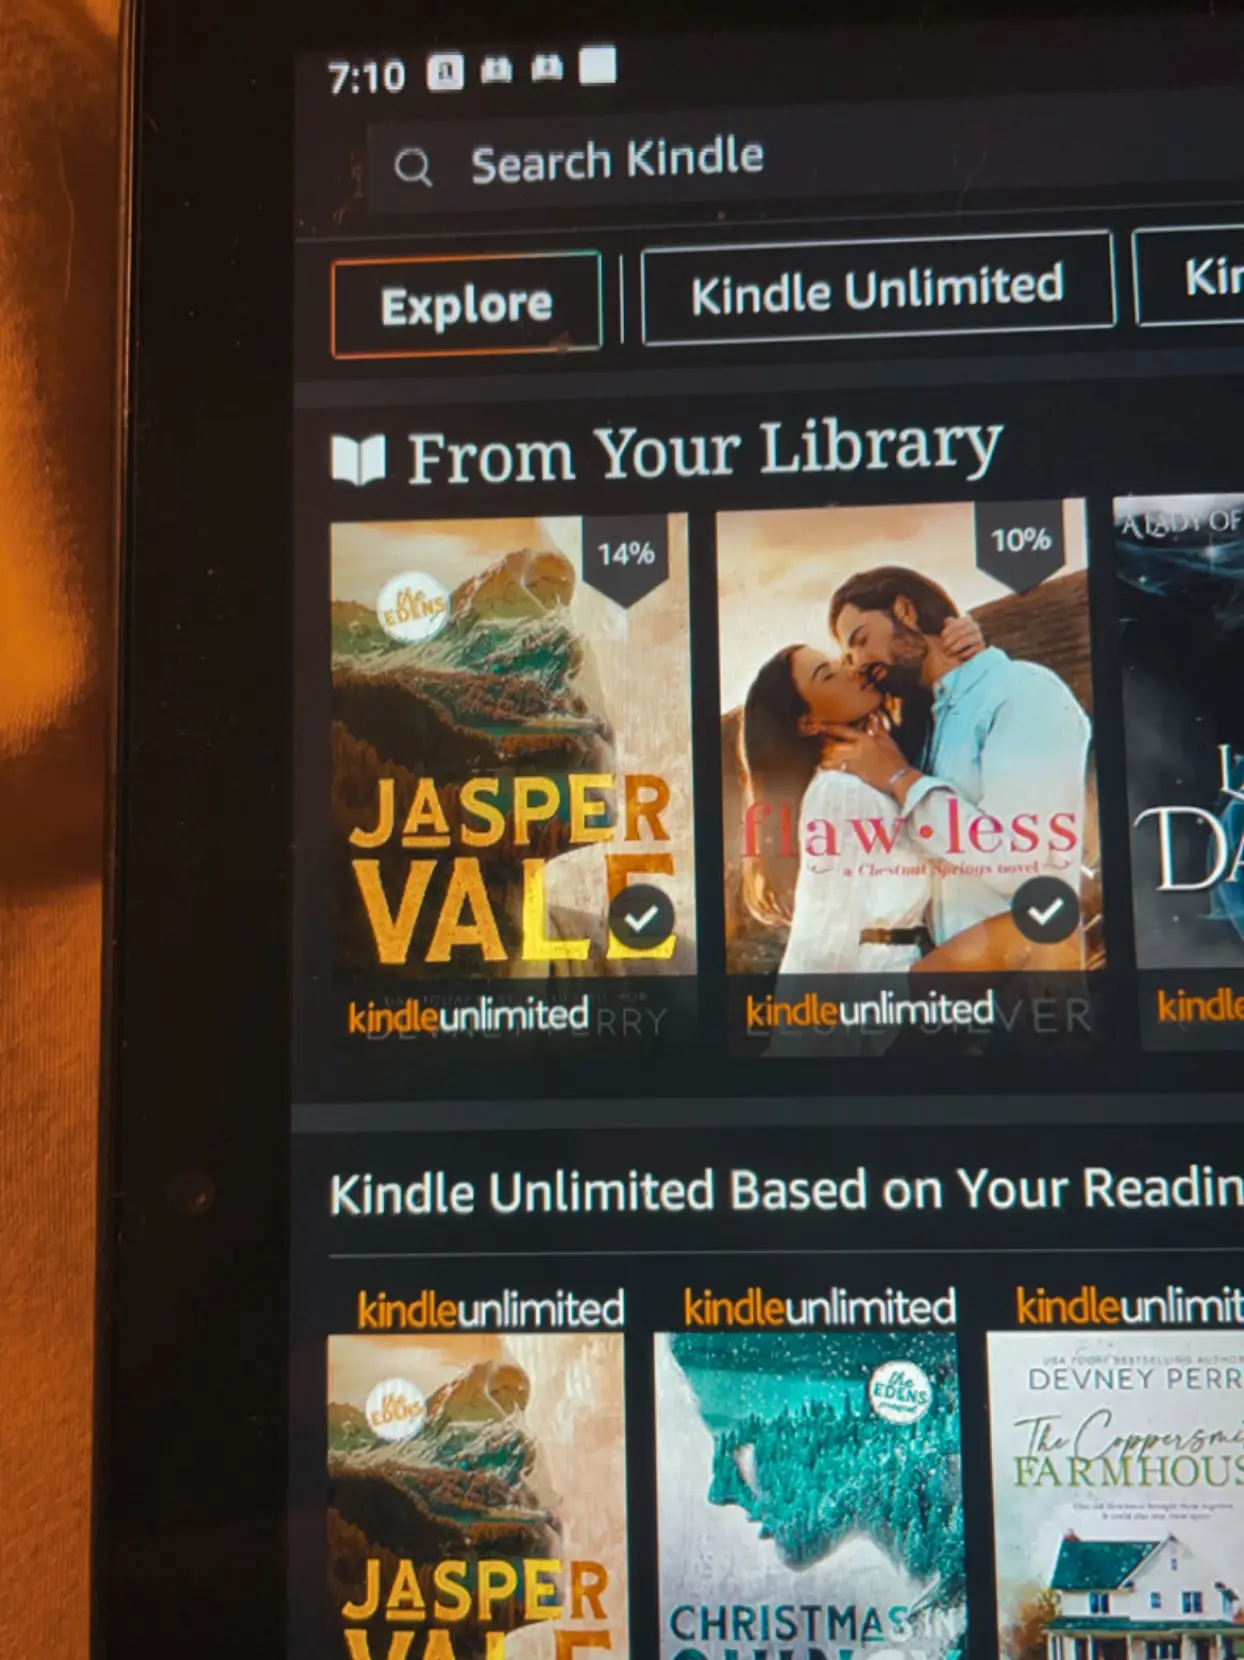 kindle vs library: which one is better for book lovers - Lemon8 Search